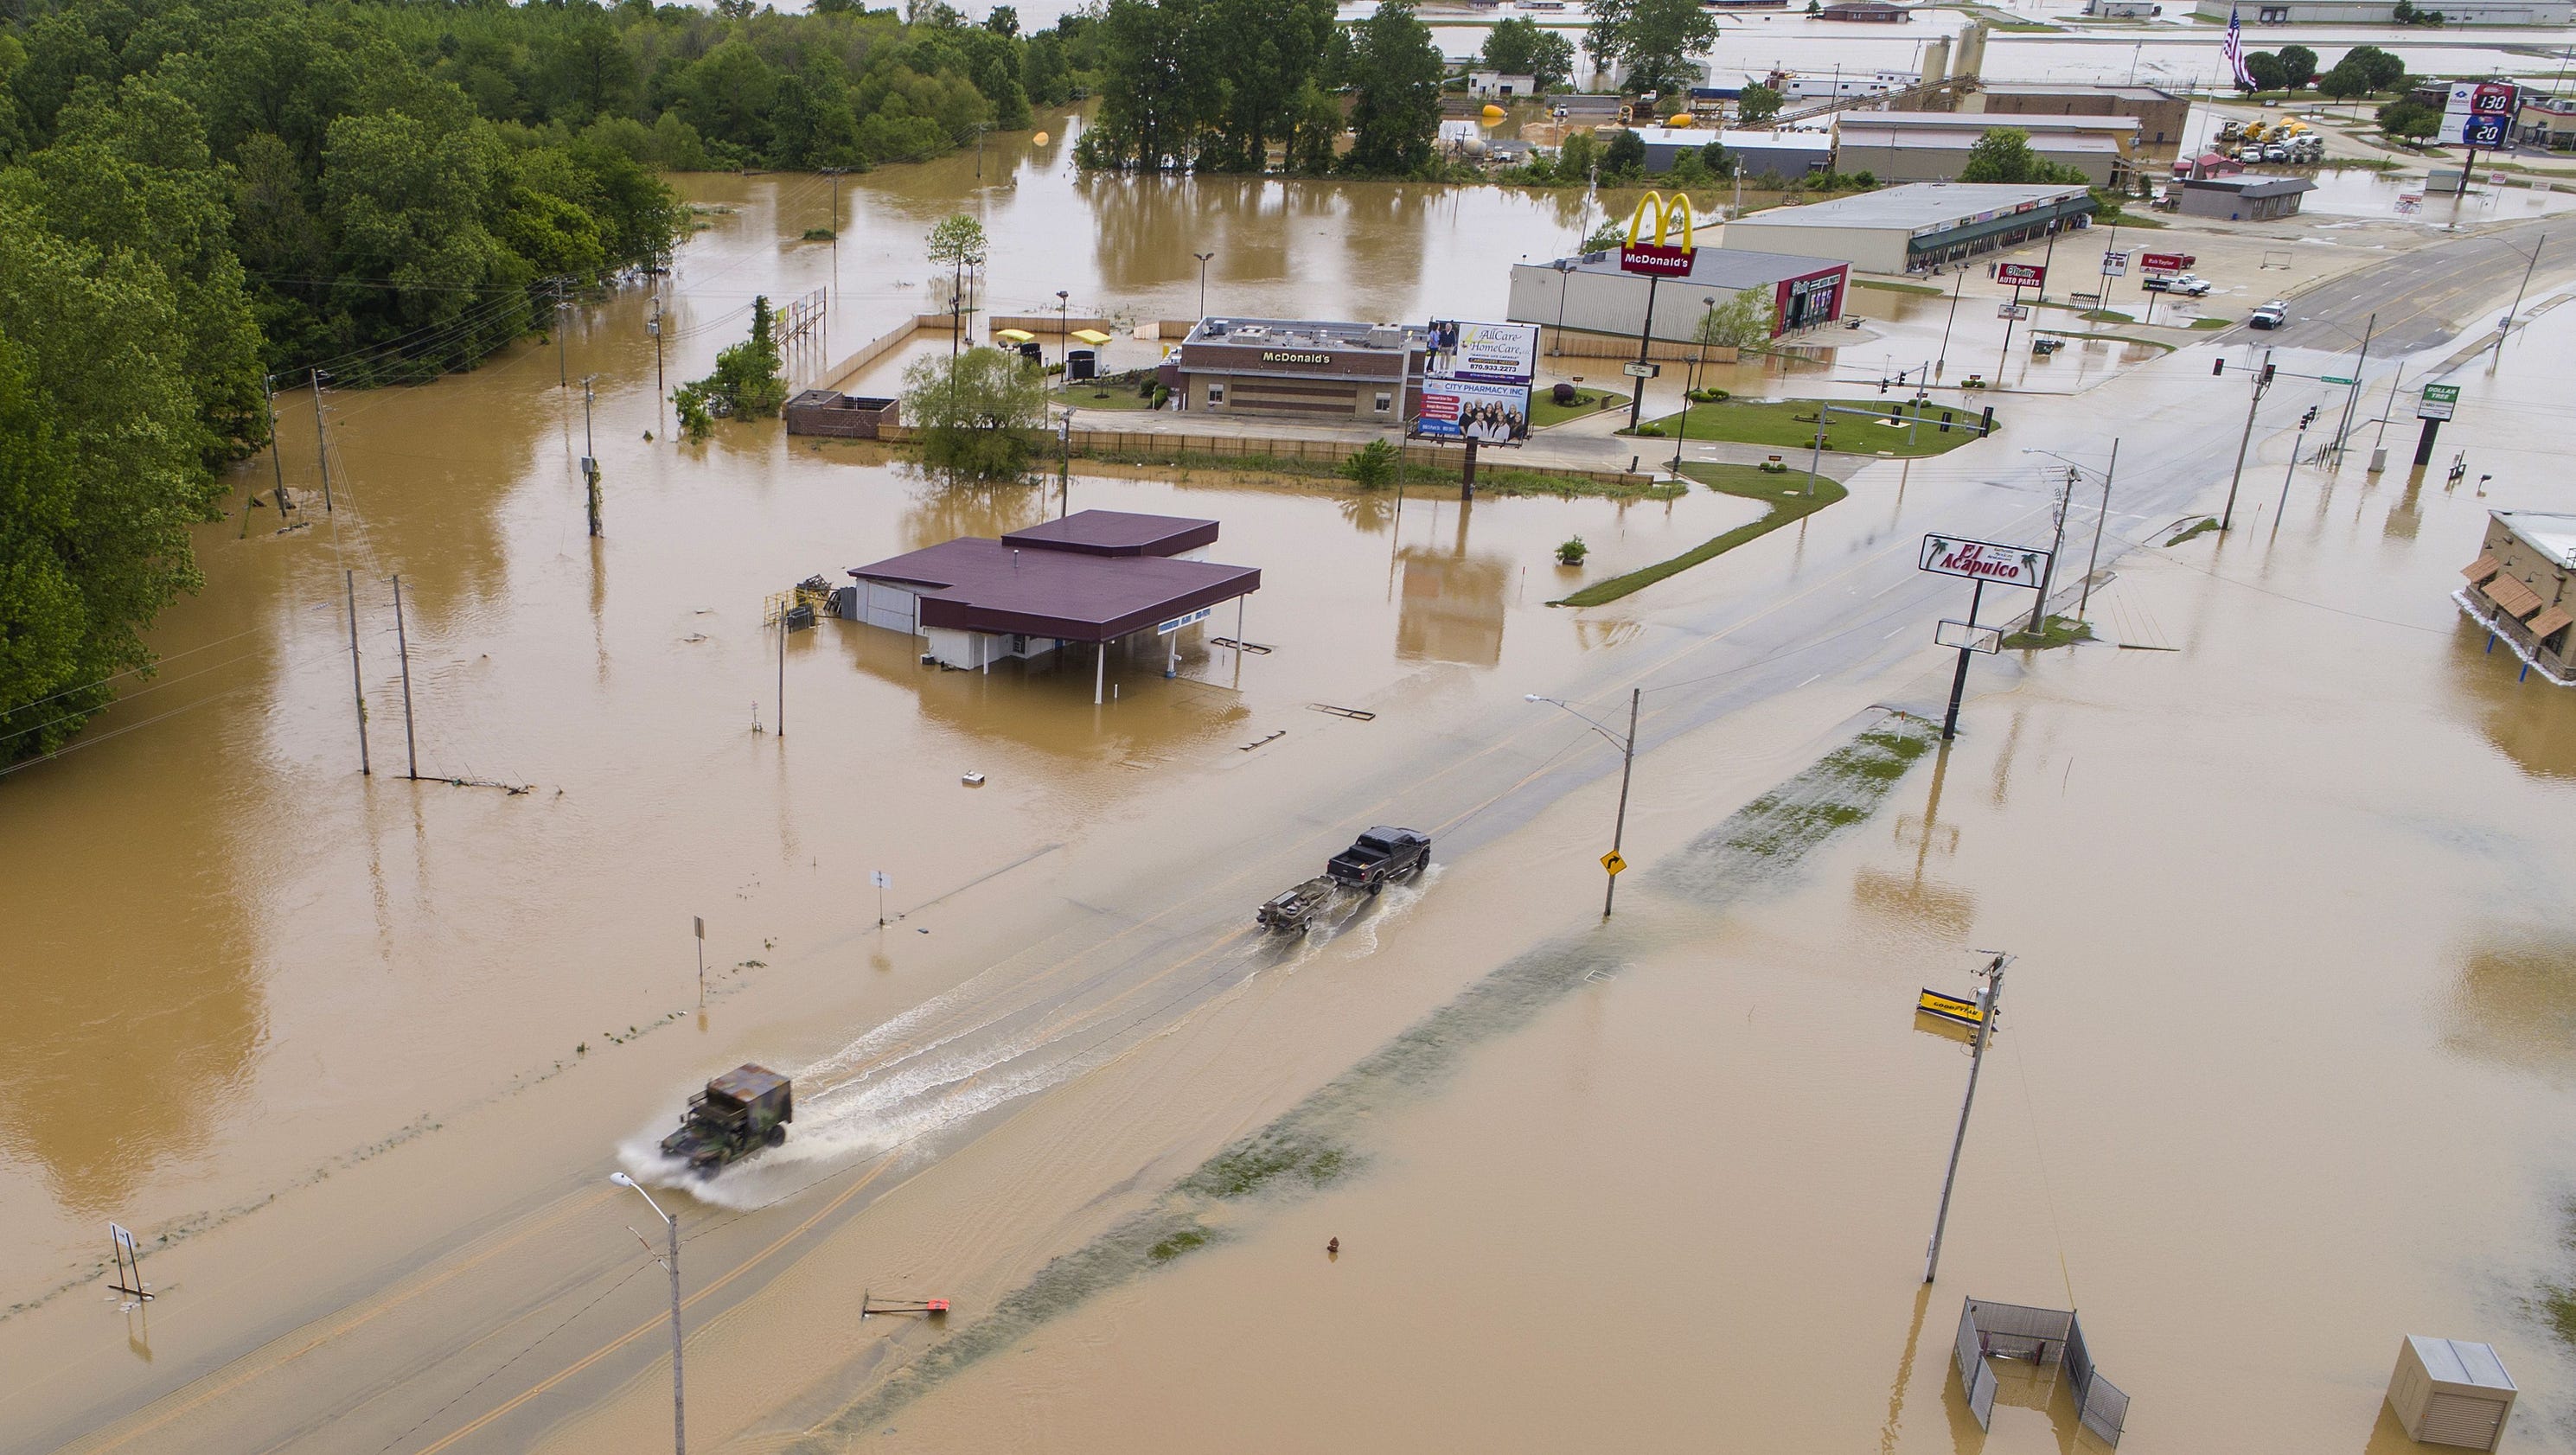 Arkansas, Missouri flooding: Aerial images show water overtaking towns3200 x 1680